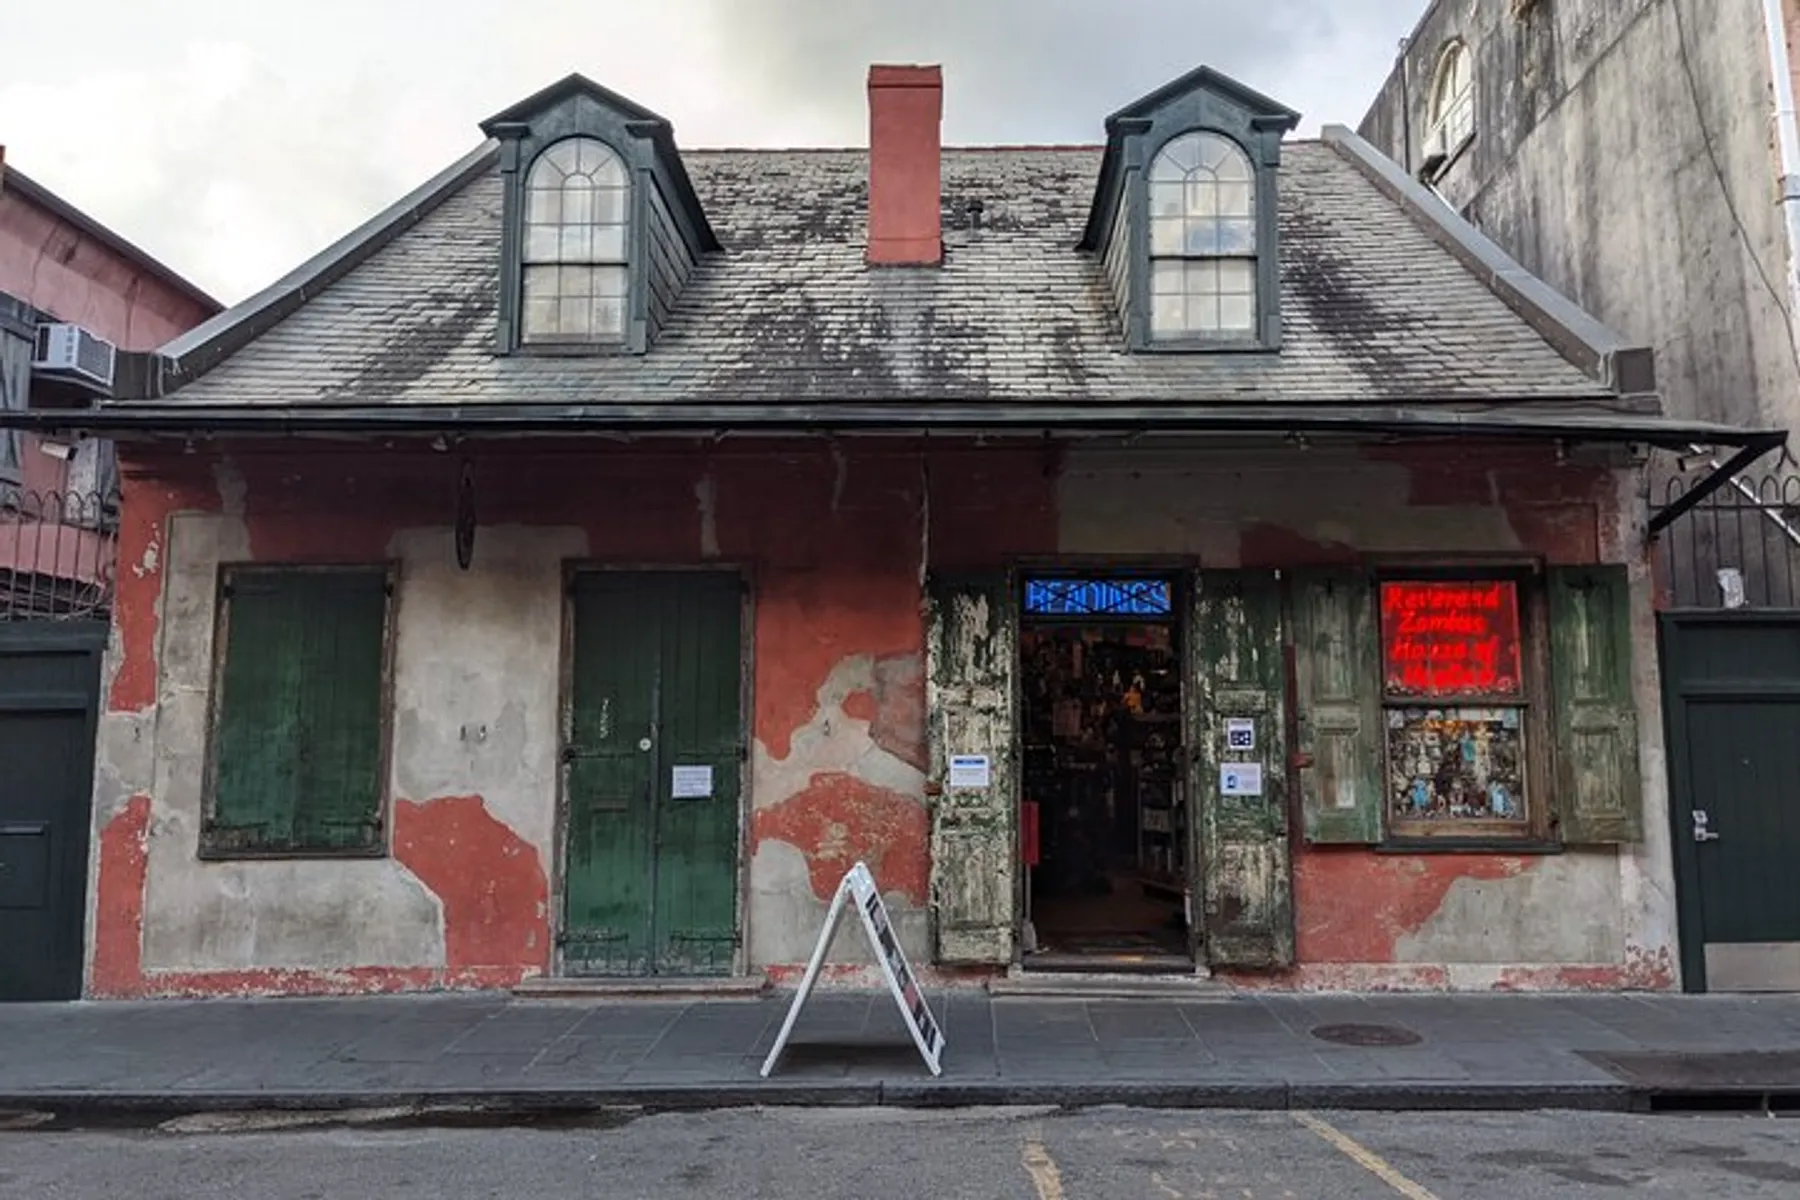 An old, weathered building with a peeling red facade, green shutters, and a sign offering readings, evoking a sense of history and mystery.